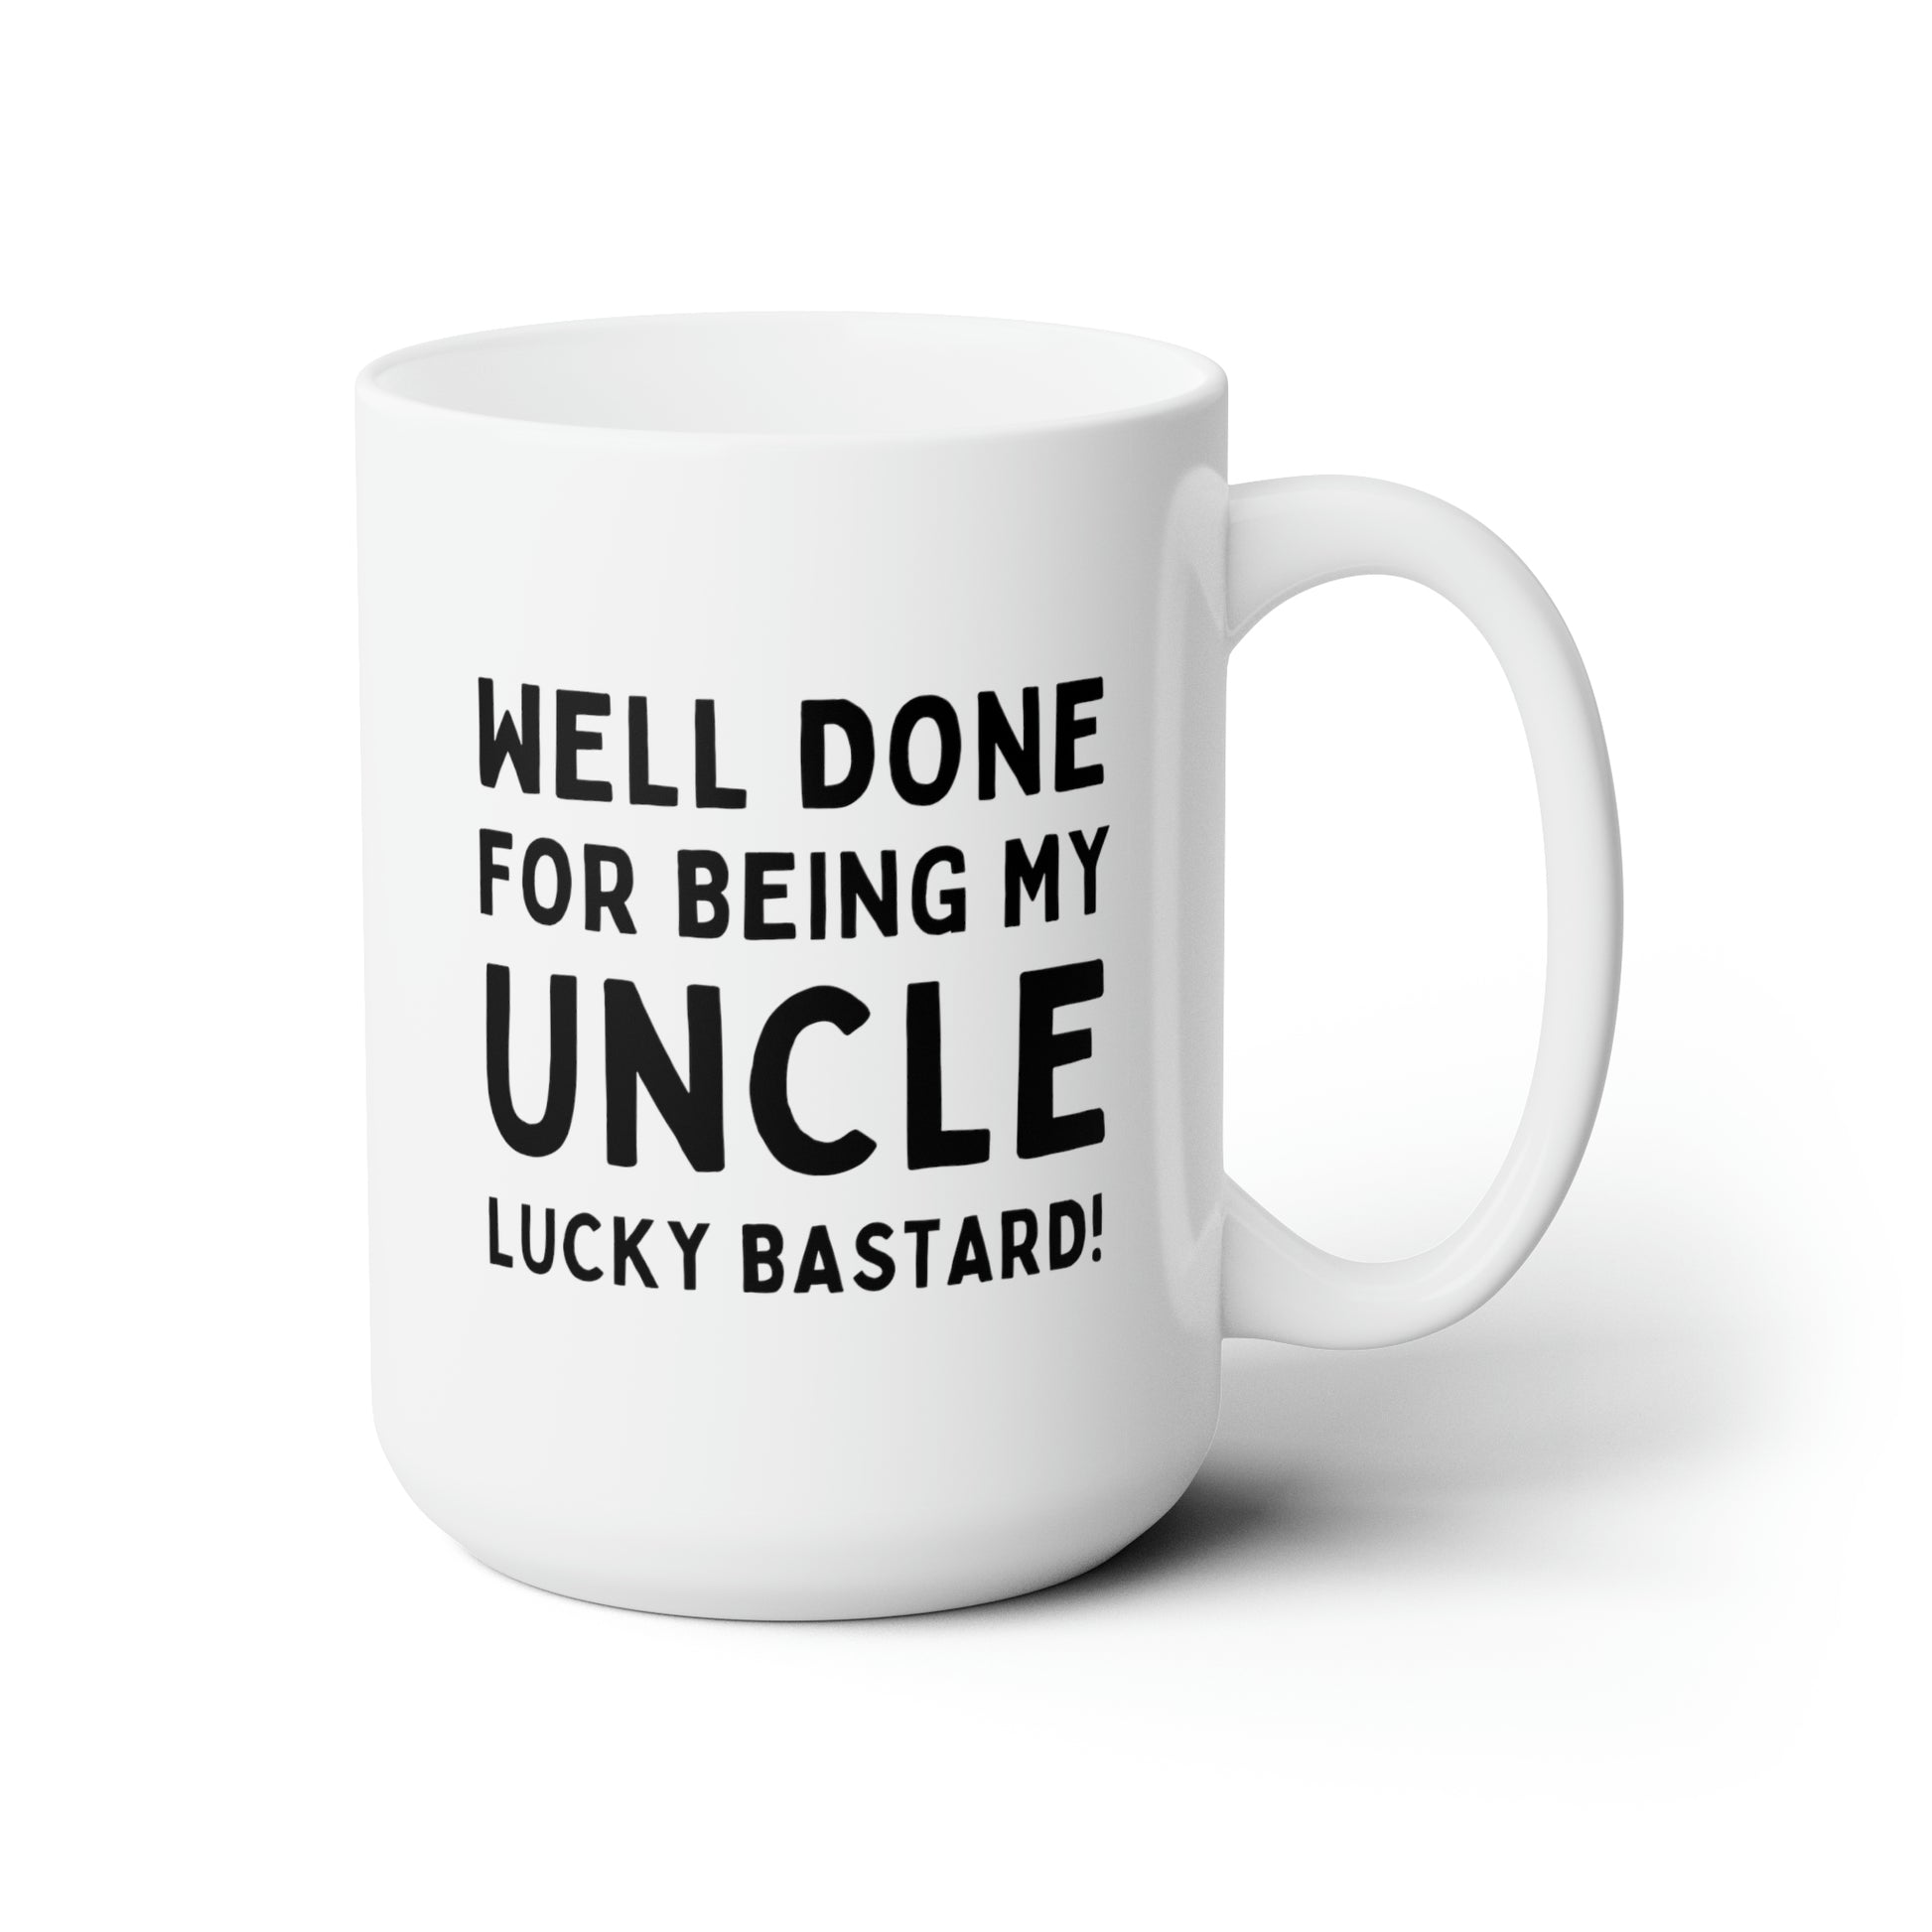 Well Done For Being My Uncle Lucky Bastard 15oz white funny large coffee mug gift for uncle congrats birthday christmas waveywares wavey wares wavywares wavy wares